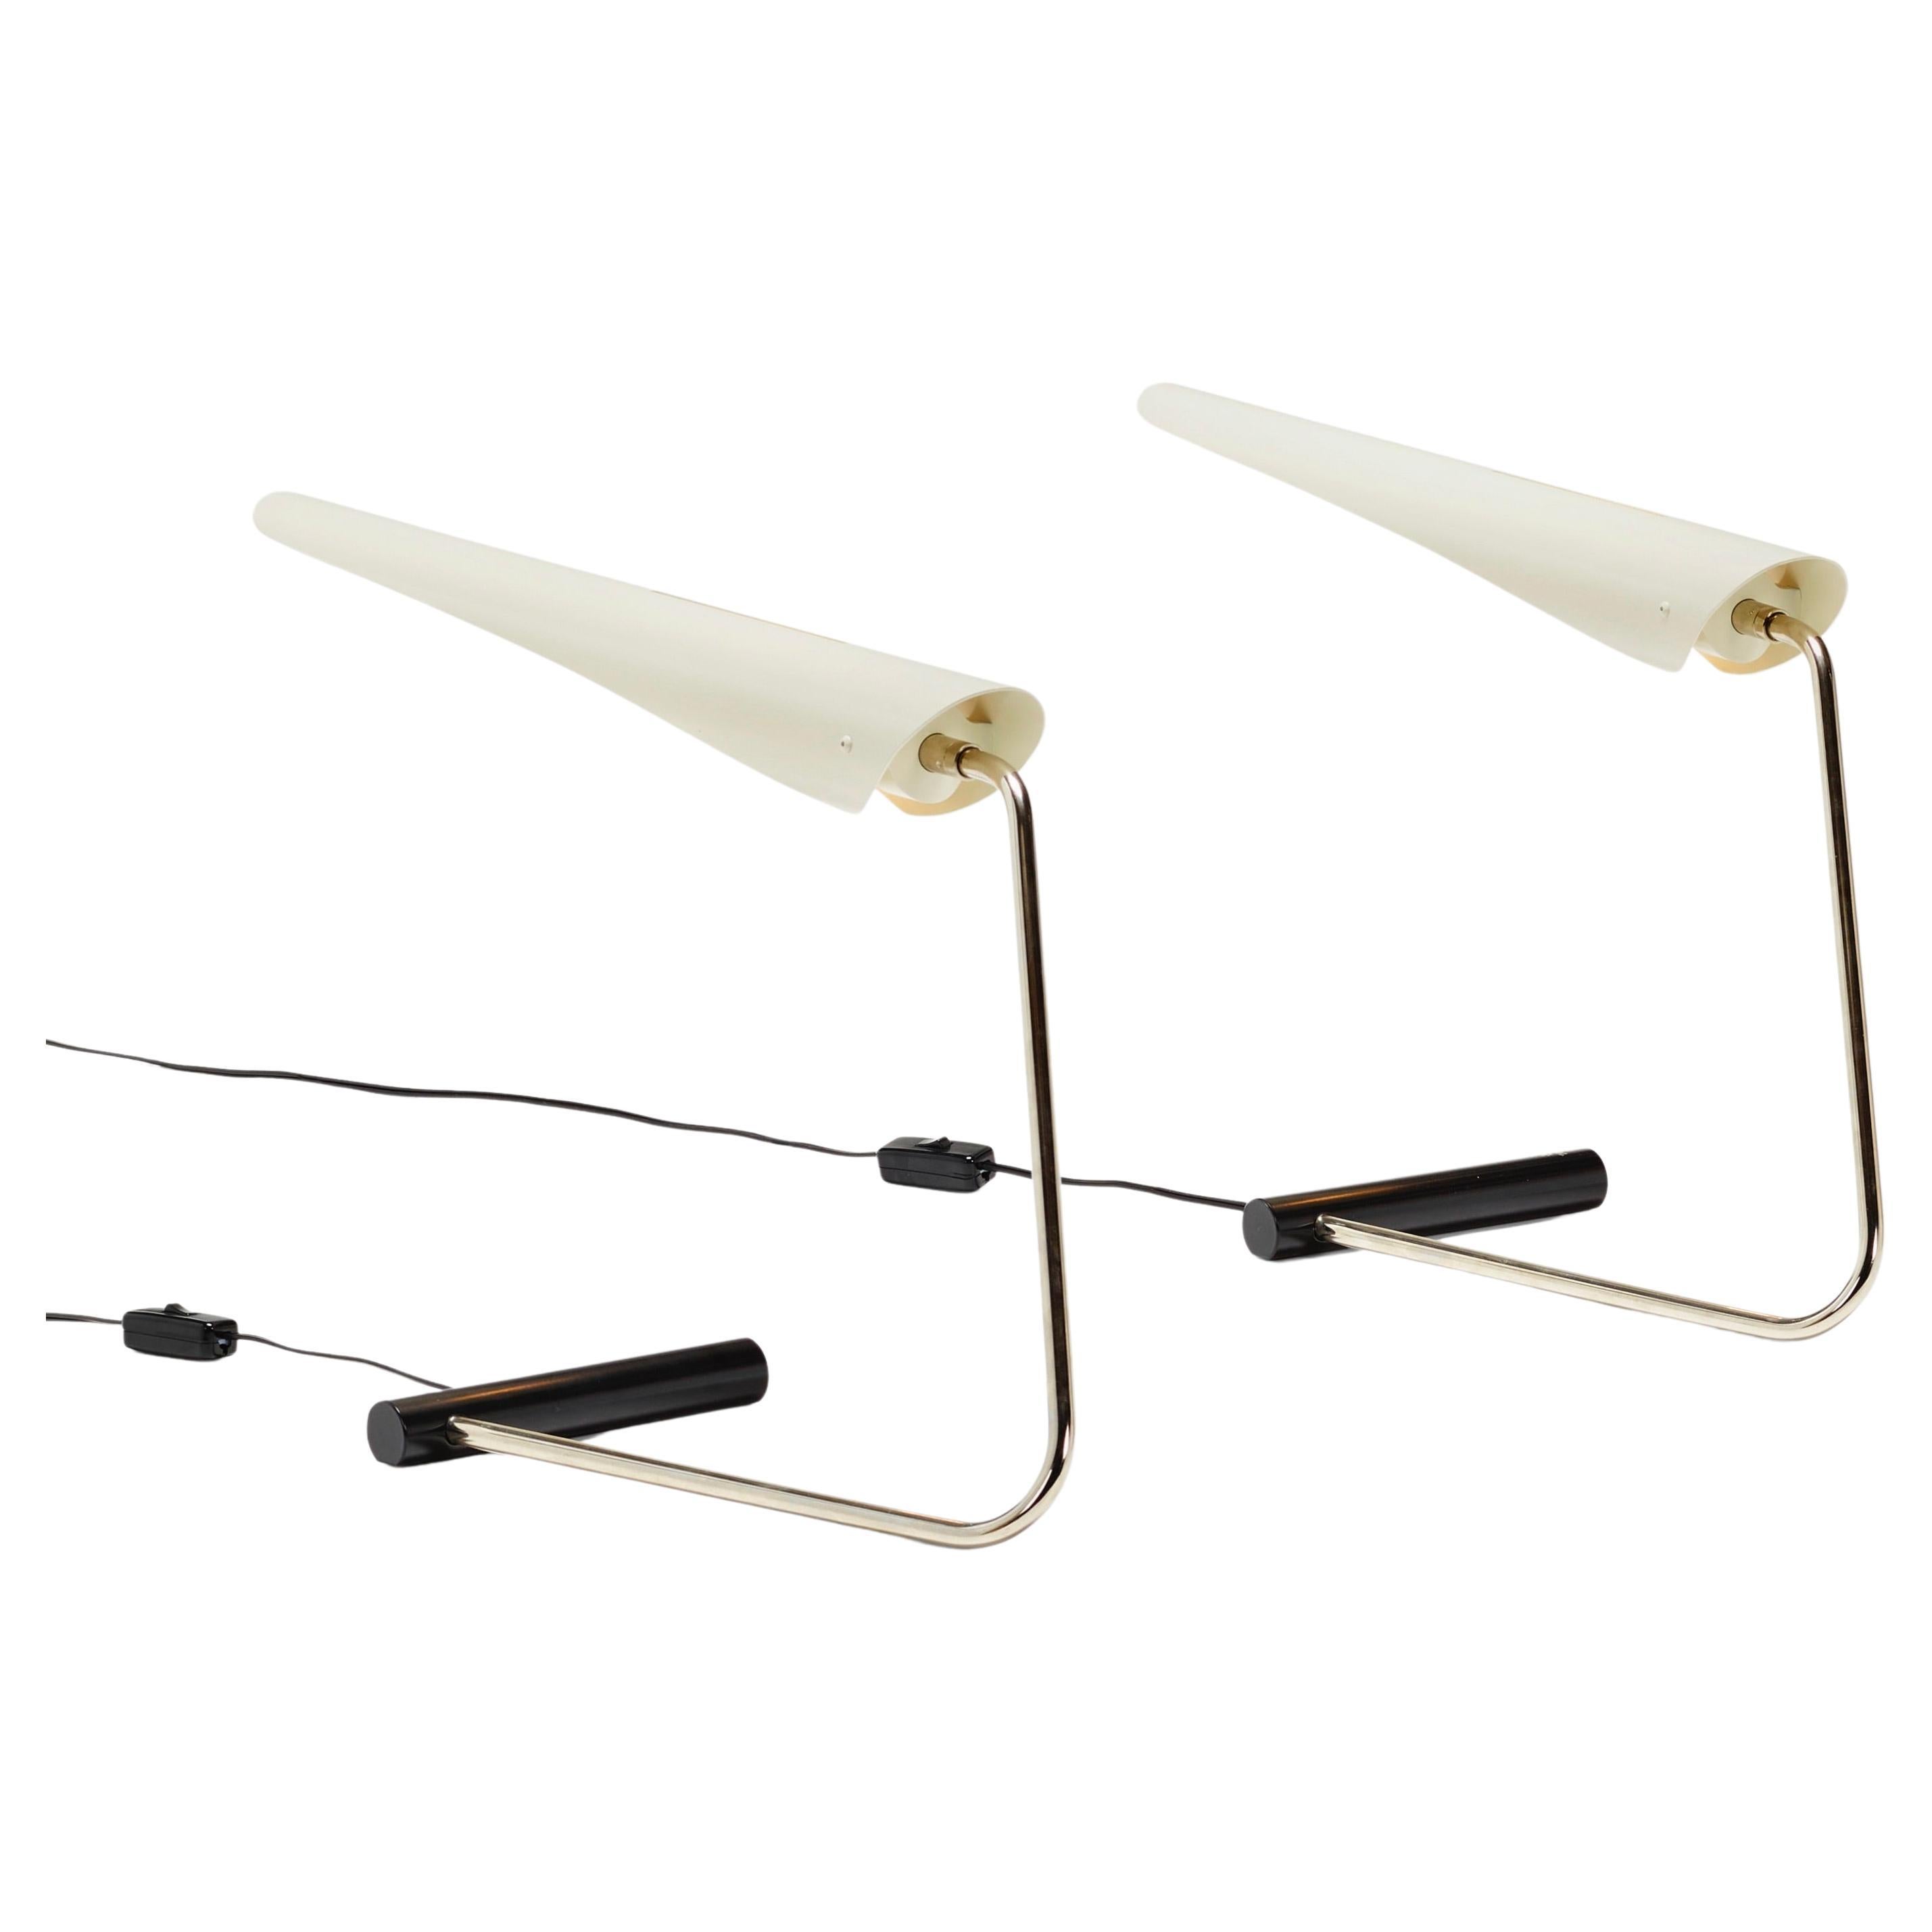 Beautiful David Weeks Studio Sarus Table Lamps Set (Model 113) 
A Sarus shade perches on a hand-bent metal frame to form this piece, which is at once a sculptural object and a functional task lamp. Shade can be rotated for a concentrated cast.
Lamps